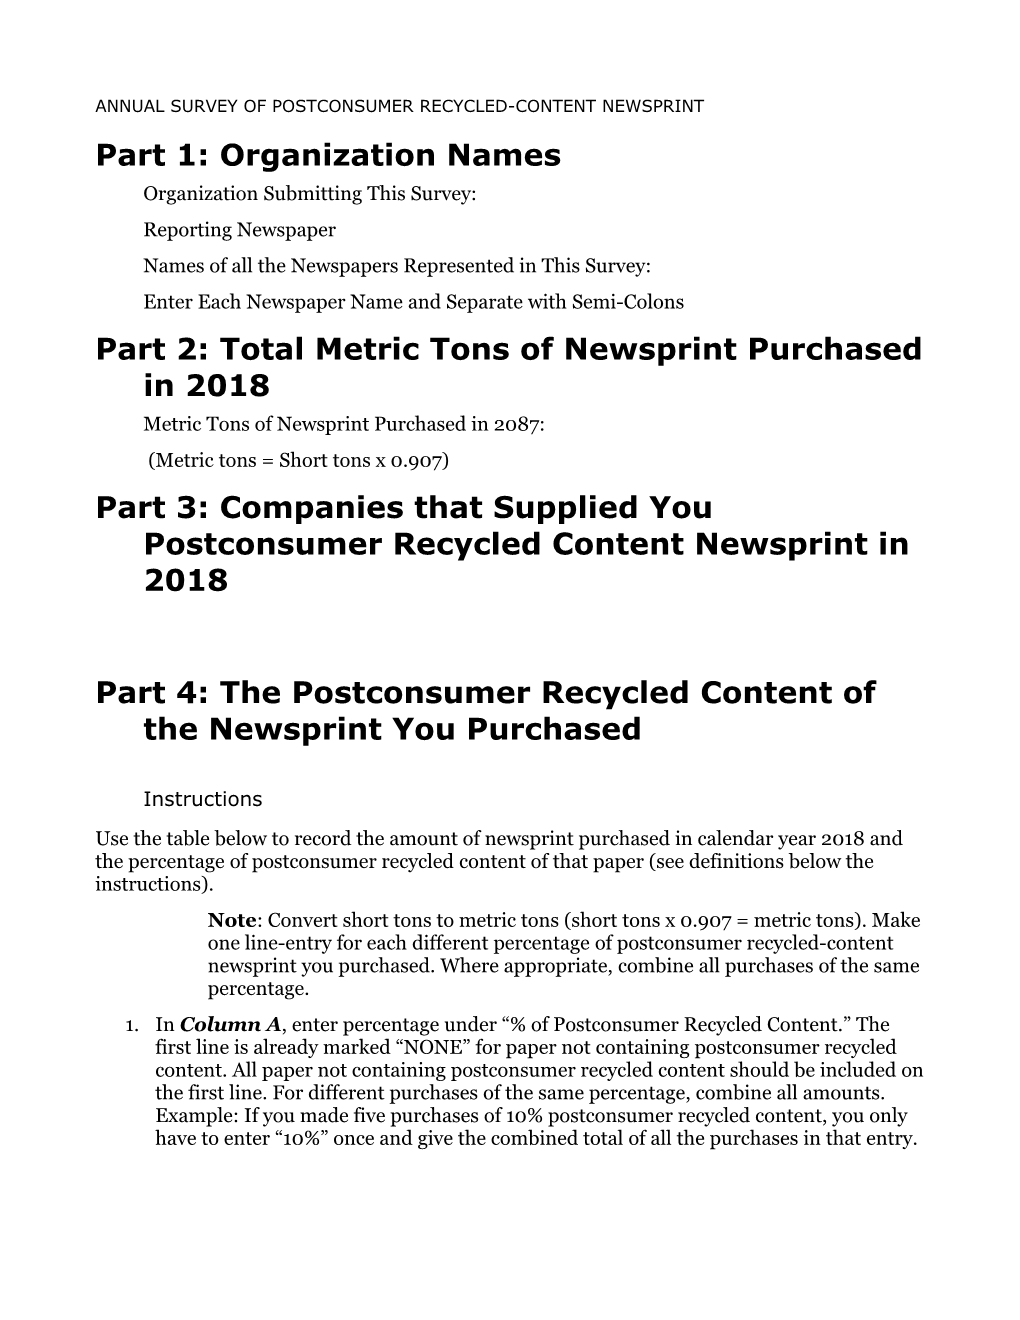 Annual Survey of Postconsumer Recycled-Content Newsprint